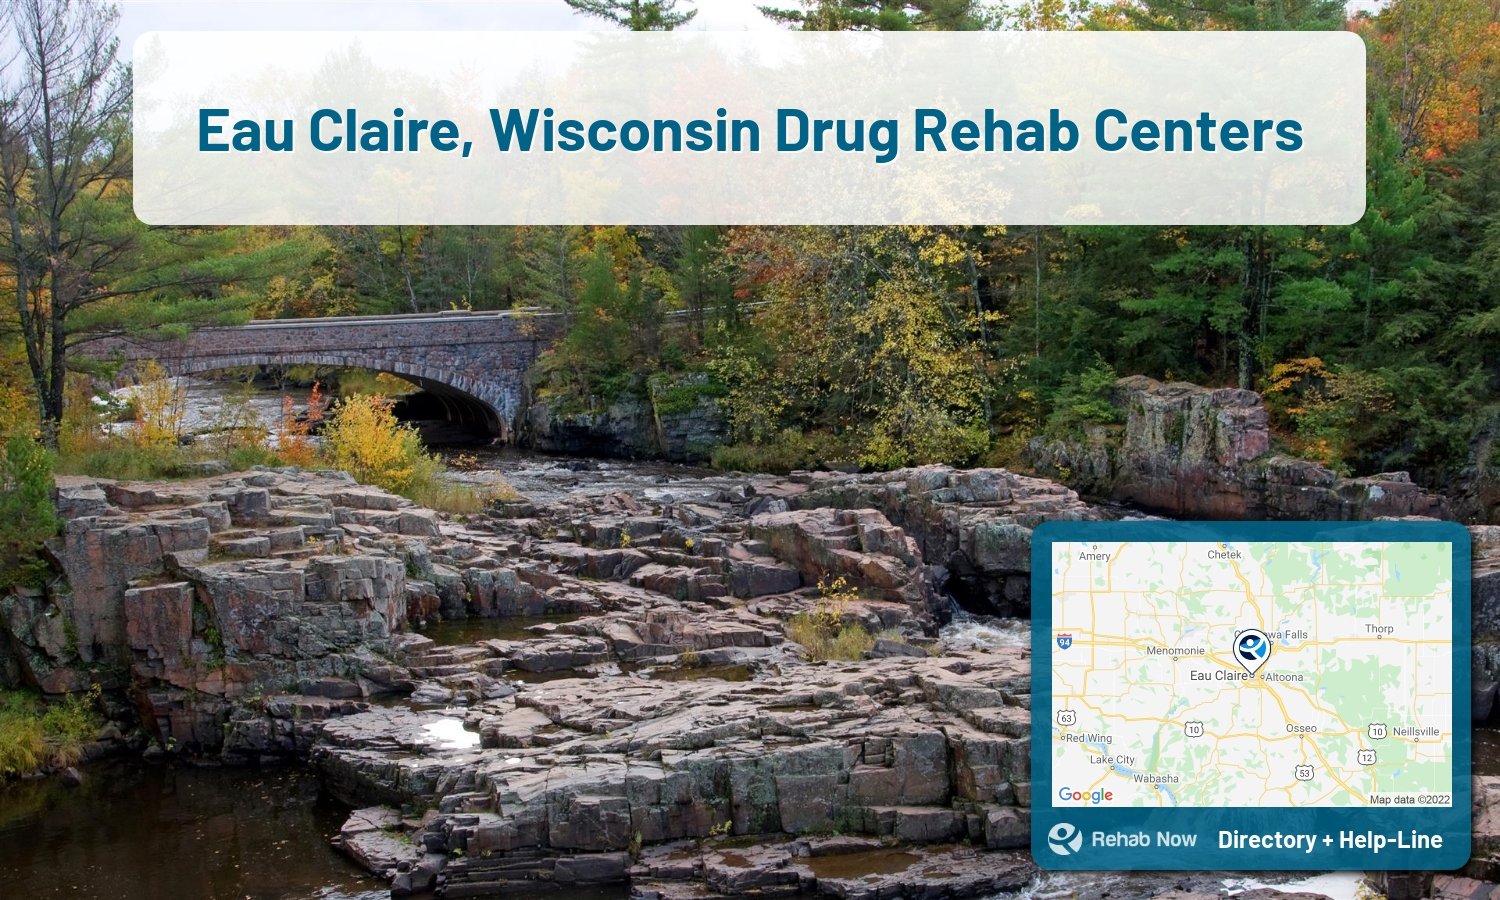 Our experts can help you find treatment now in Eau Claire, Wisconsin. We list drug rehab and alcohol centers in Wisconsin.